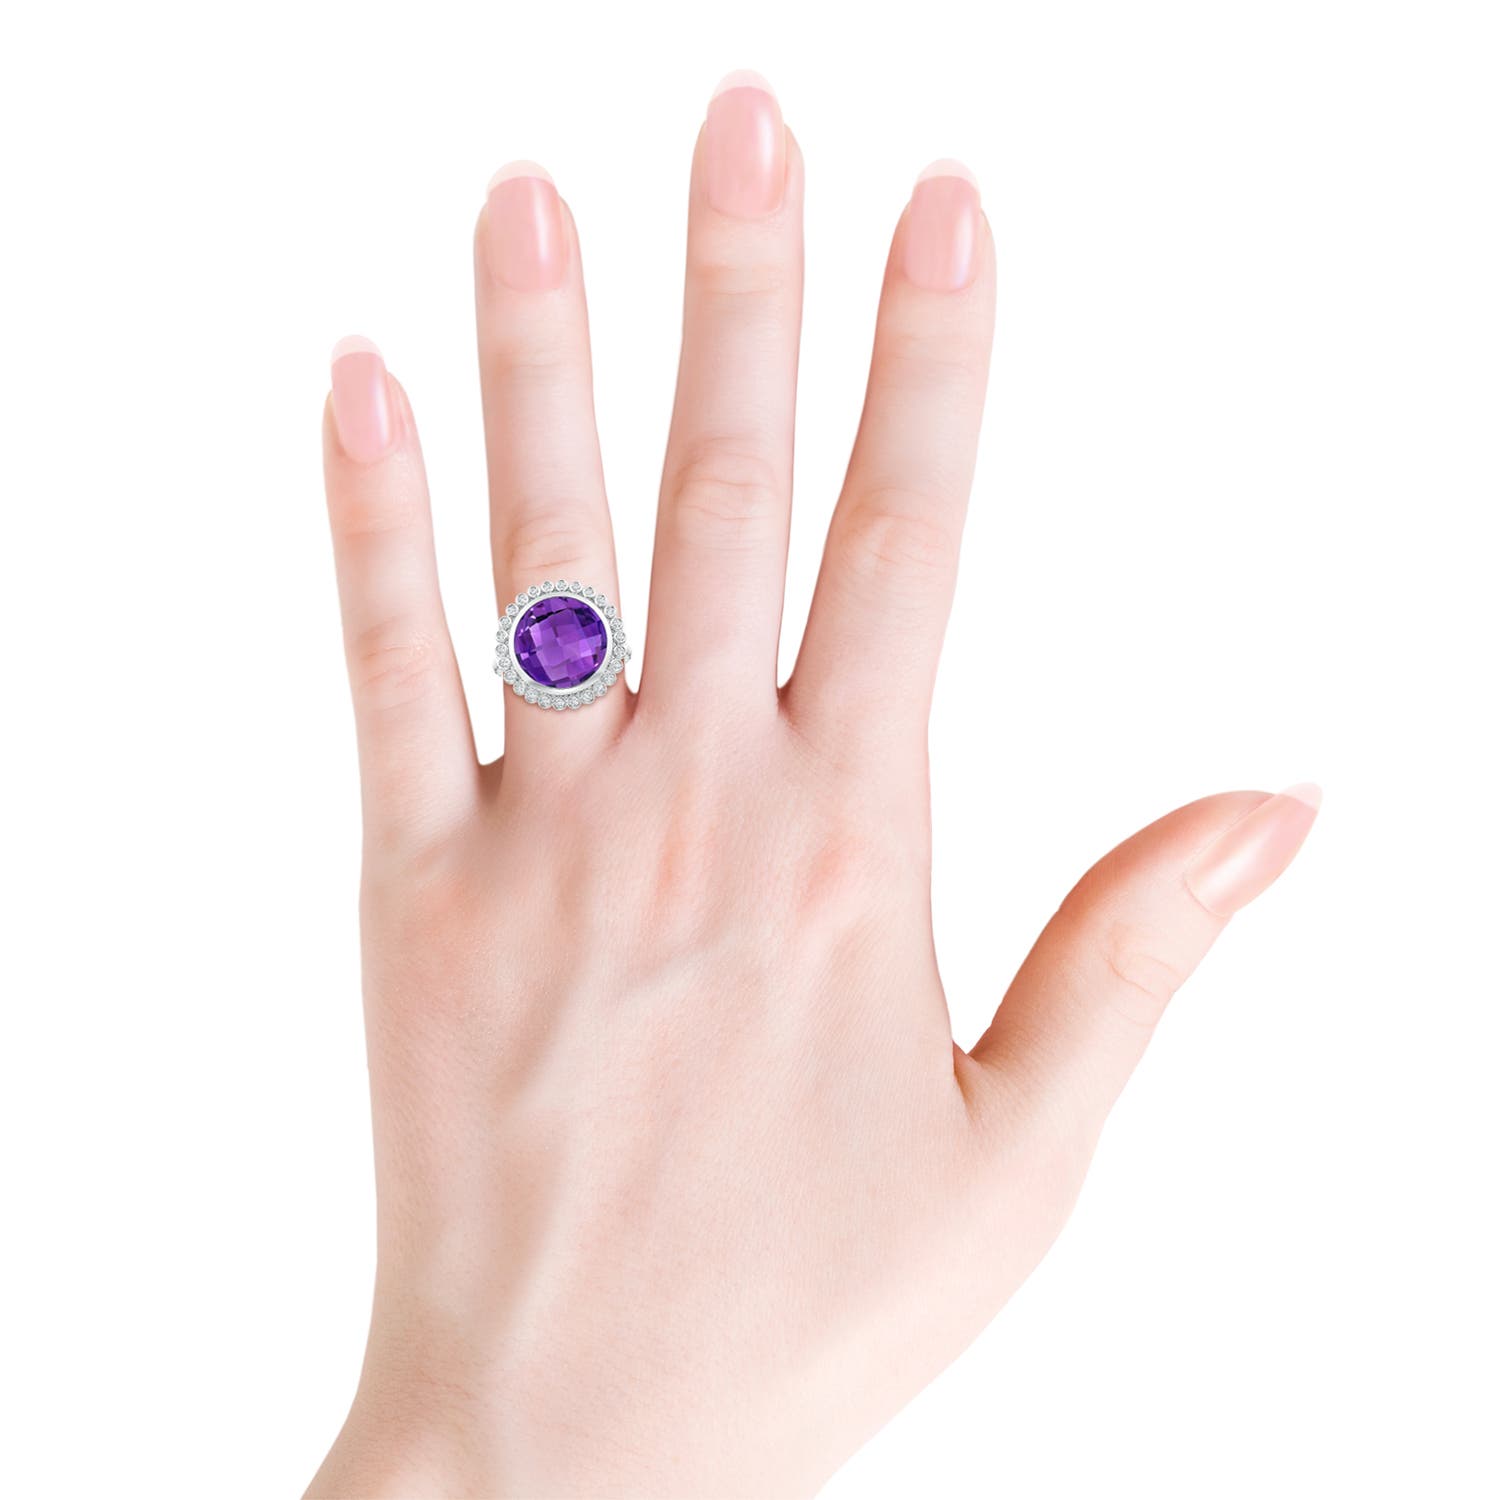 AAA - Amethyst / 5.71 CT / 14 KT White Gold